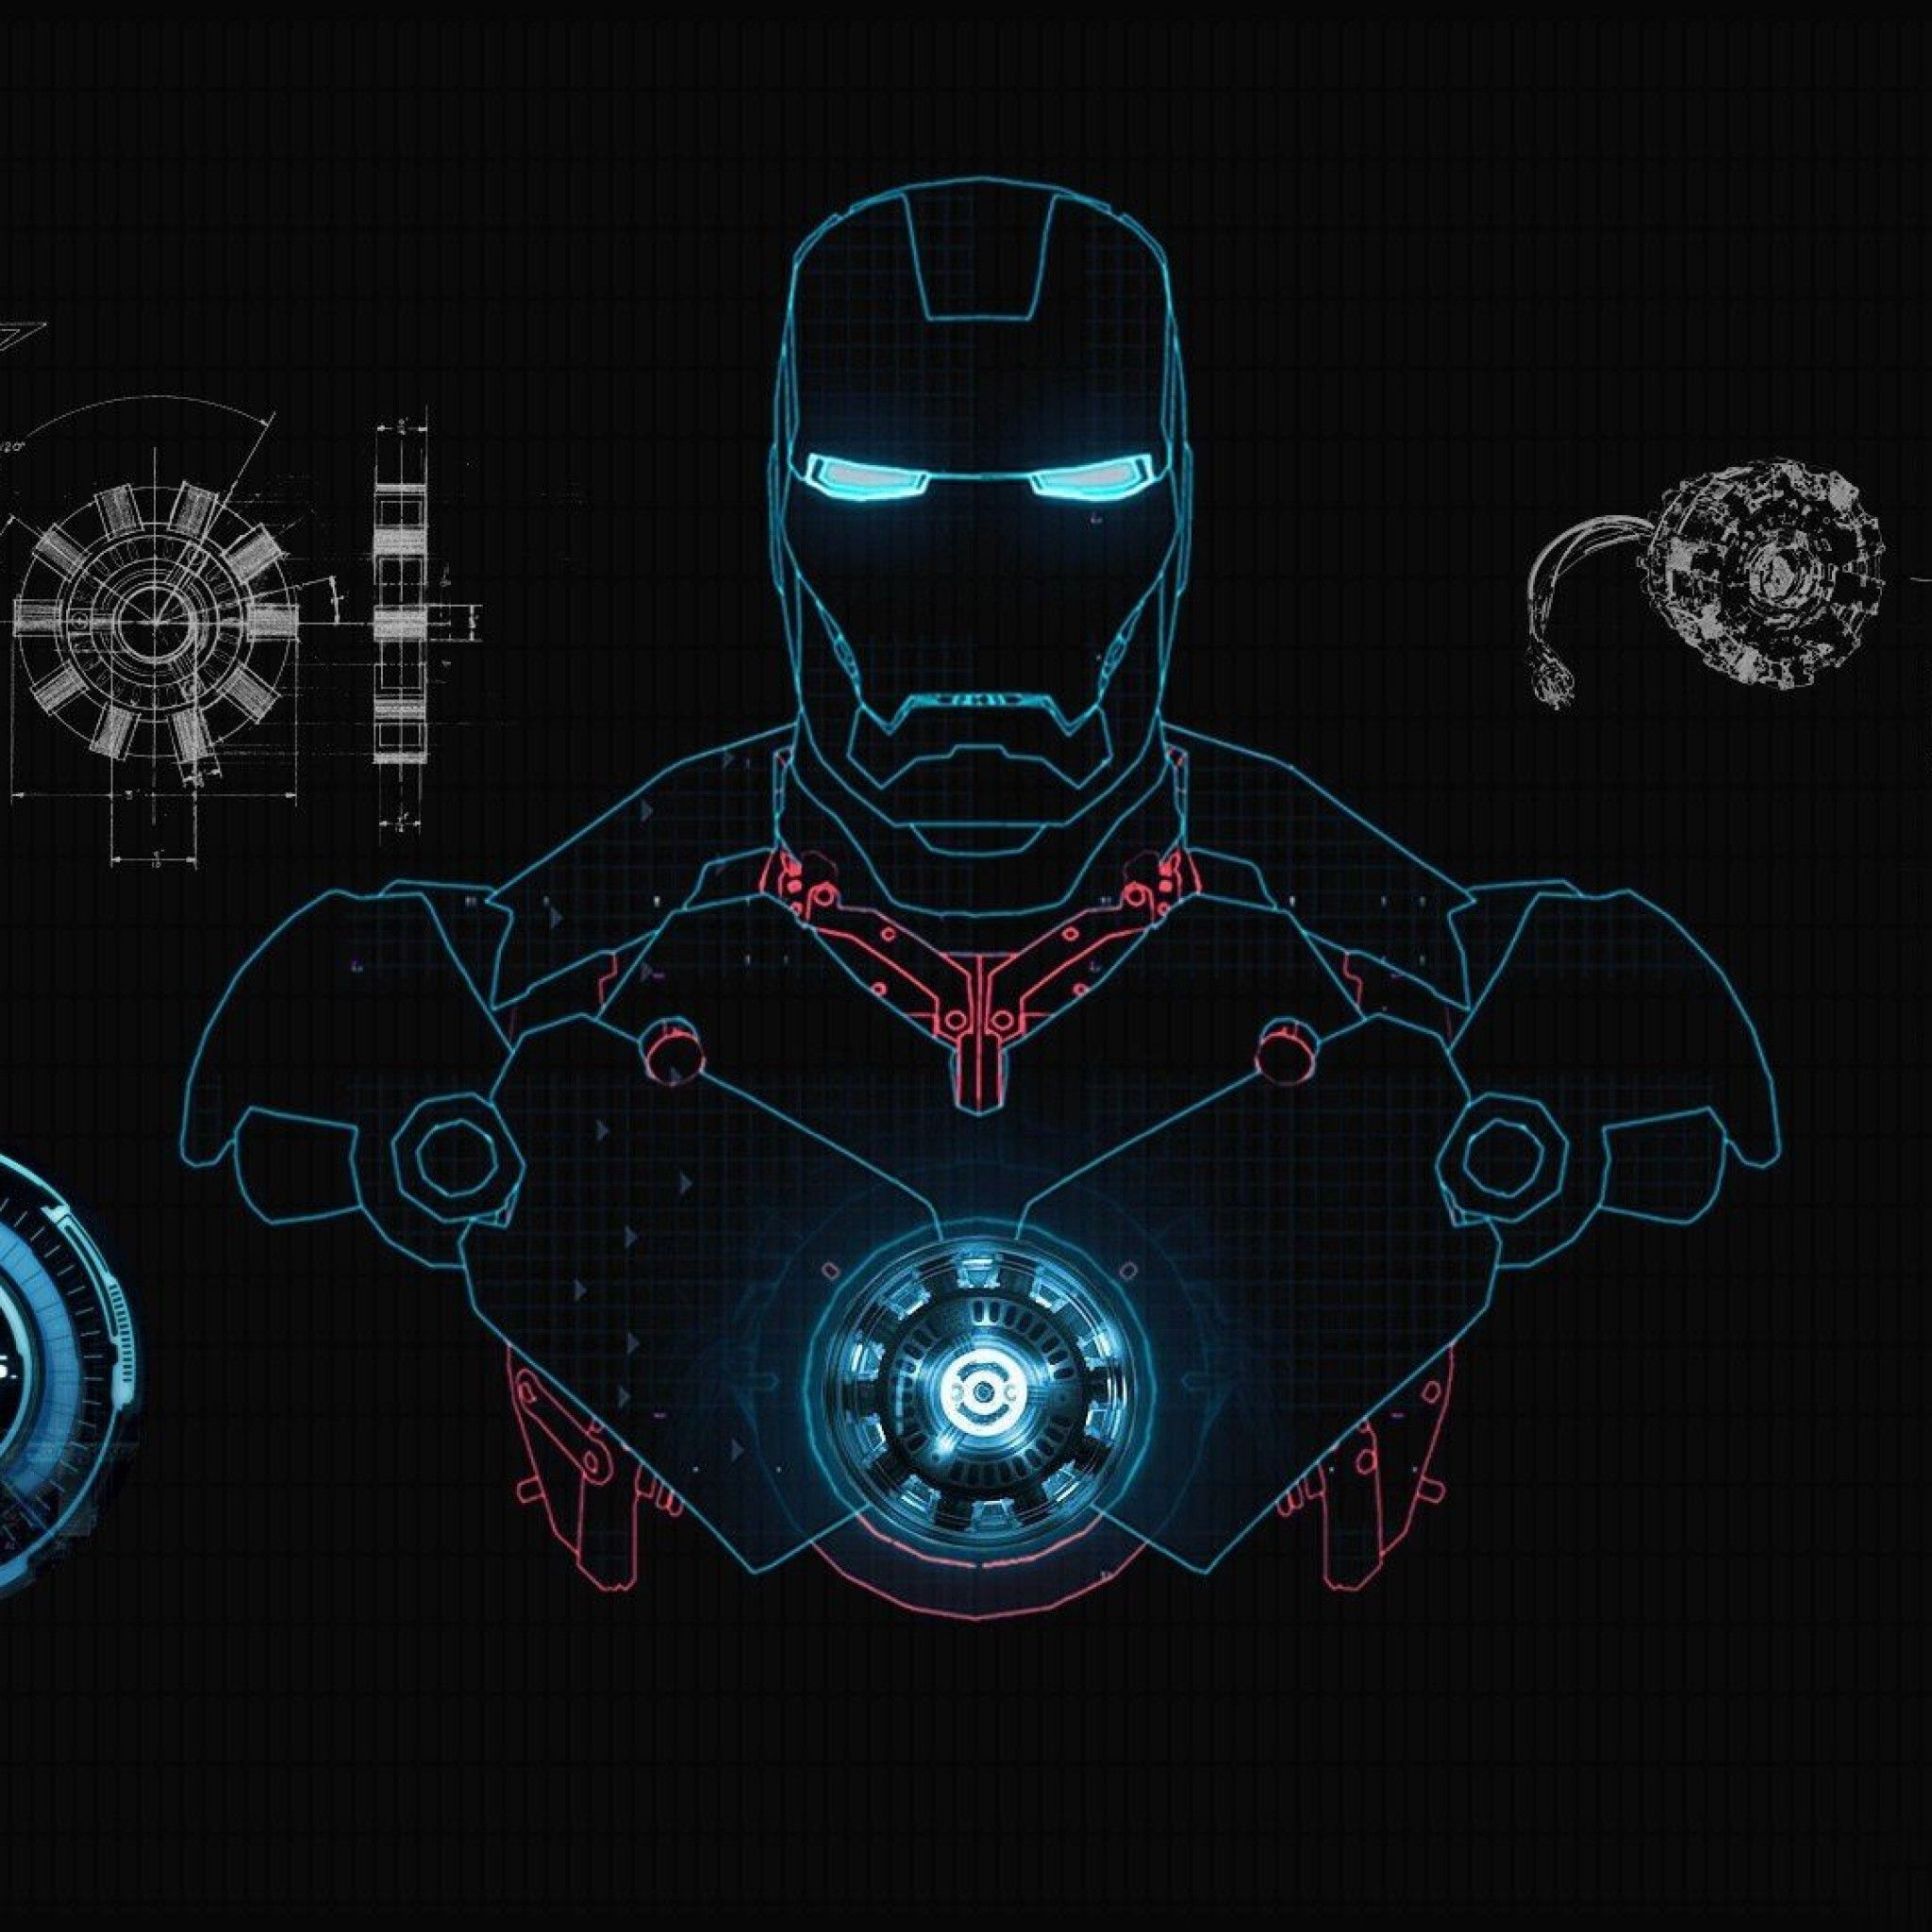 Latest Ironman Live Wallpaper iPhone Group. Iron man tattoo, Iron man wallpaper, Iron man